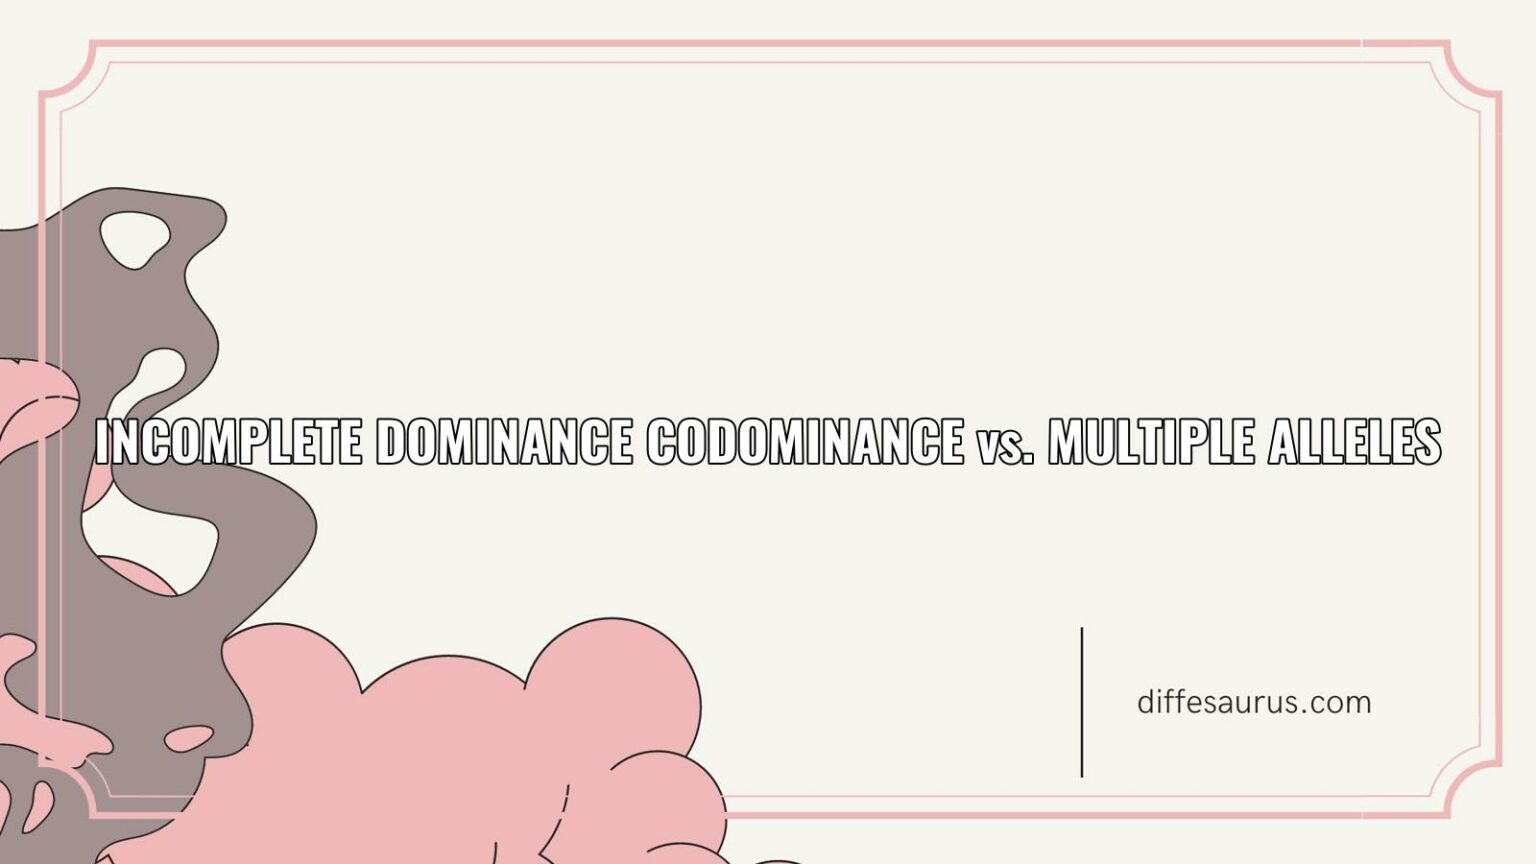 How Do Incomplete Dominance Codominance And Multiple Alleles Differ Diffesaurus